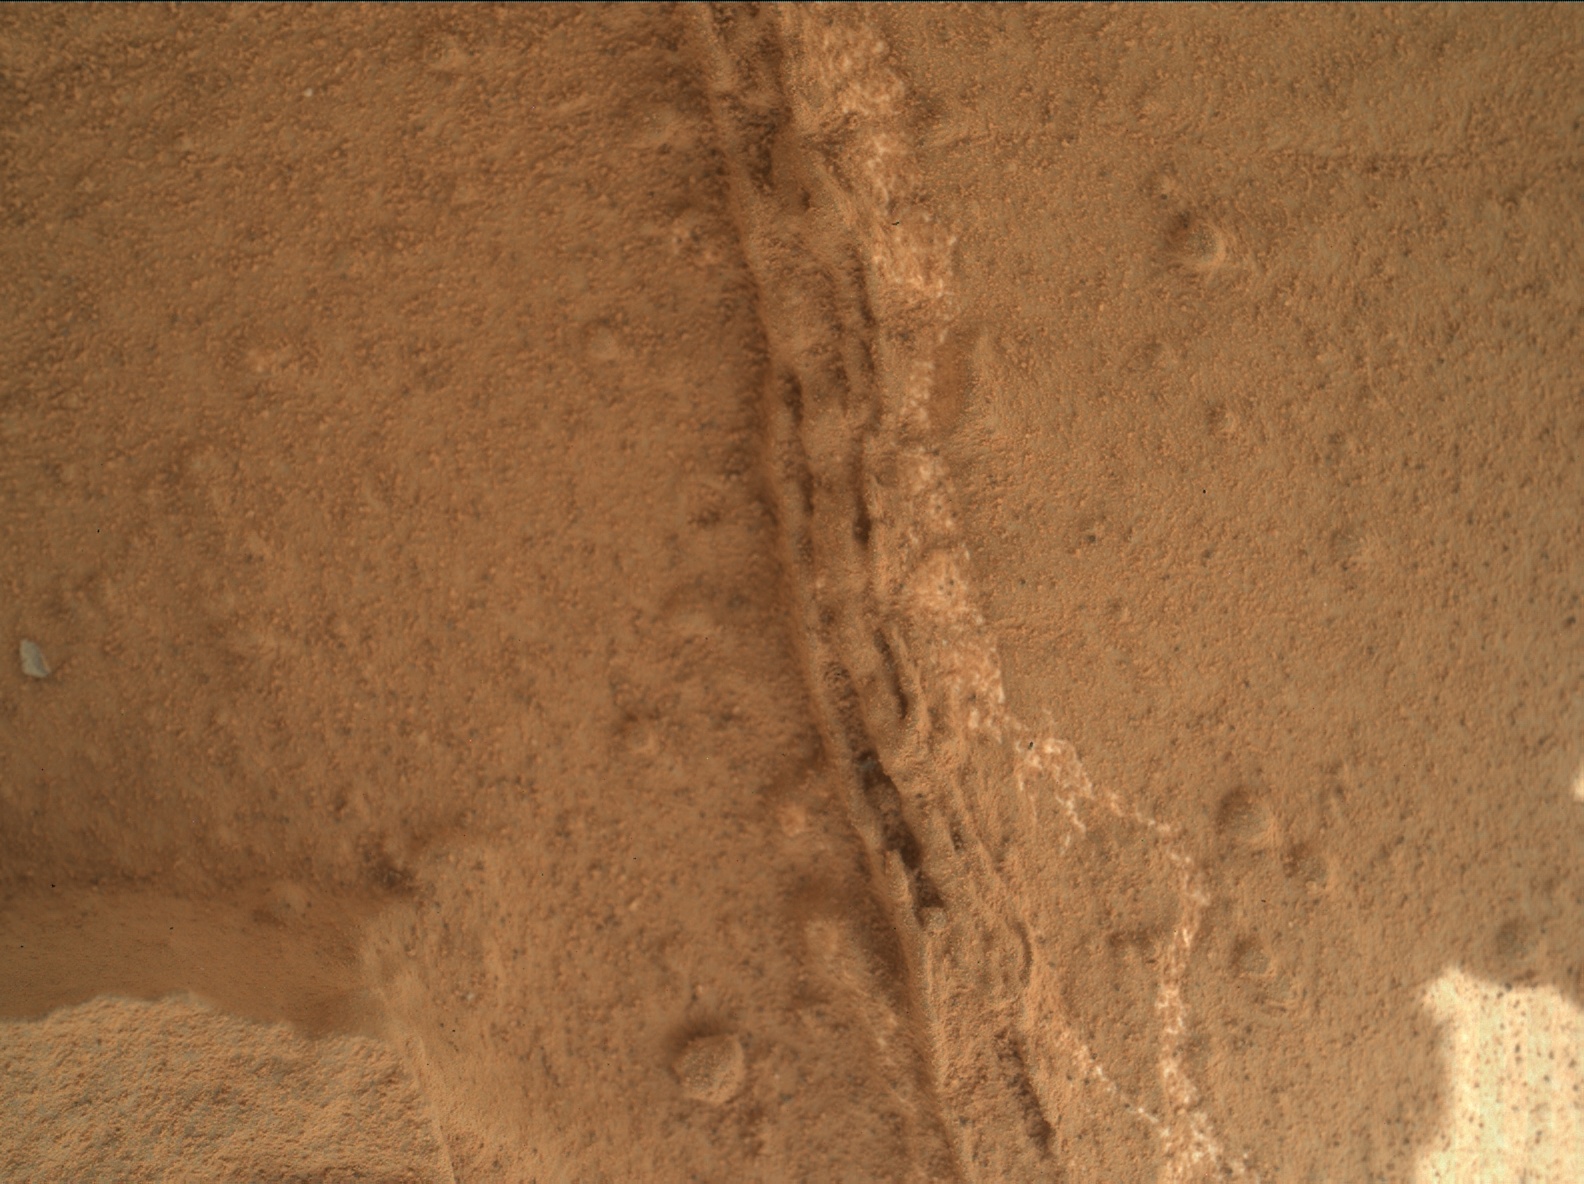 Nasa's Mars rover Curiosity acquired this image using its Mars Hand Lens Imager (MAHLI) on Sol 173